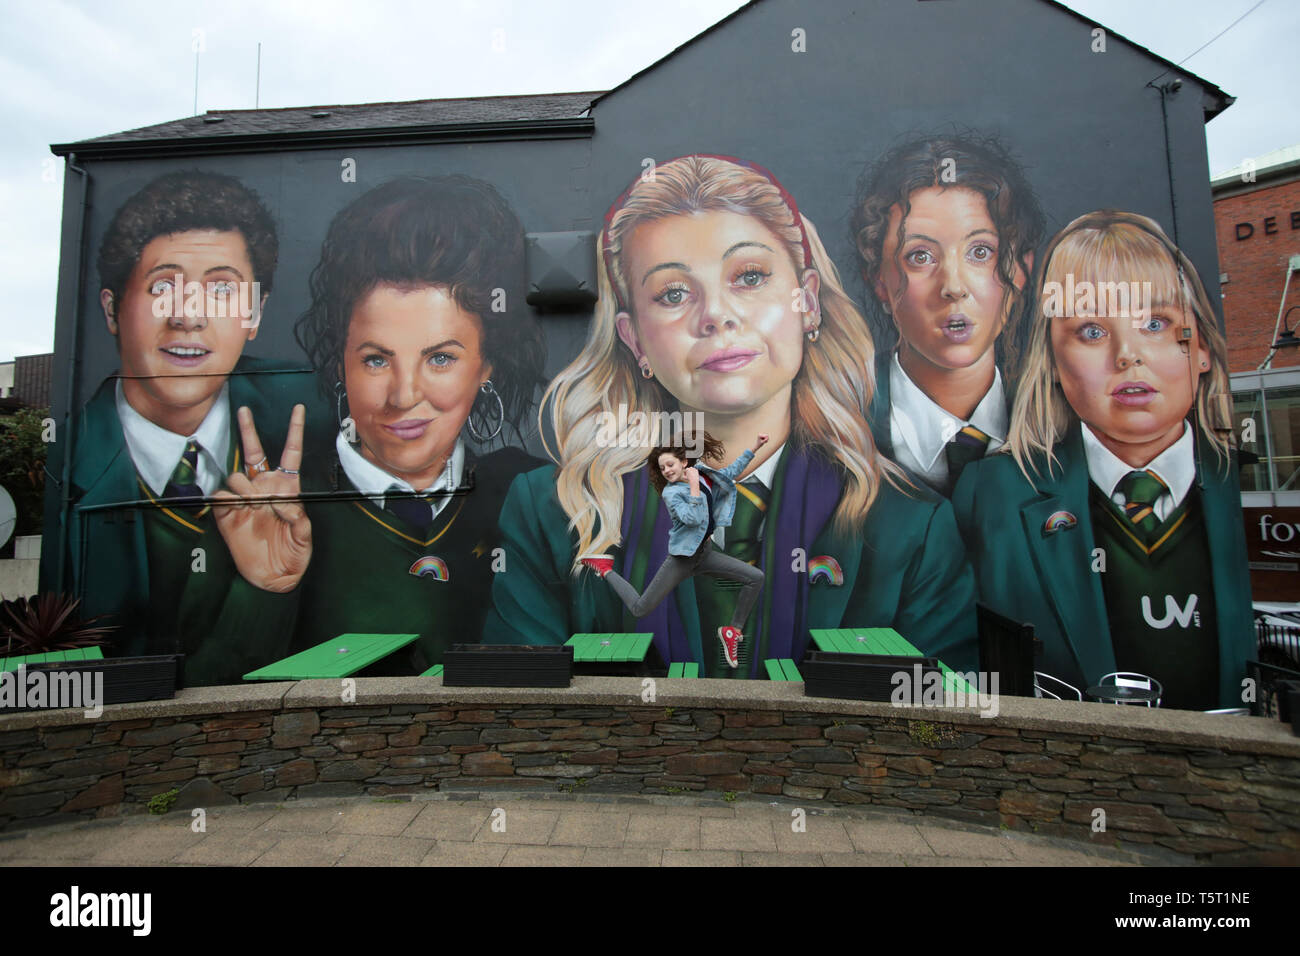 Derry, County Londonderry, Northern Ireland, 25th April, 2019 .A young girl jumps in front of a mural showing characters from the Channel 4 TV hit show Derry Girls in Derry/Londonderry, Northern Ireland. Derry Girls is a British television sitcom created and written by Lisa McGee. Staring Erin (Saoirse-Monica Jackson), her cousin Orla (Louisa Harland) and their friends Clare (Nicola Coughlan), Michelle (Jamie-Lee O'Donnell) and Michelle's English cousin James (Dylan Llewellyn) navigate their teen years during the Troubles in Derry, where they all attend a Catholic girls' secondary school. Erin Stock Photo